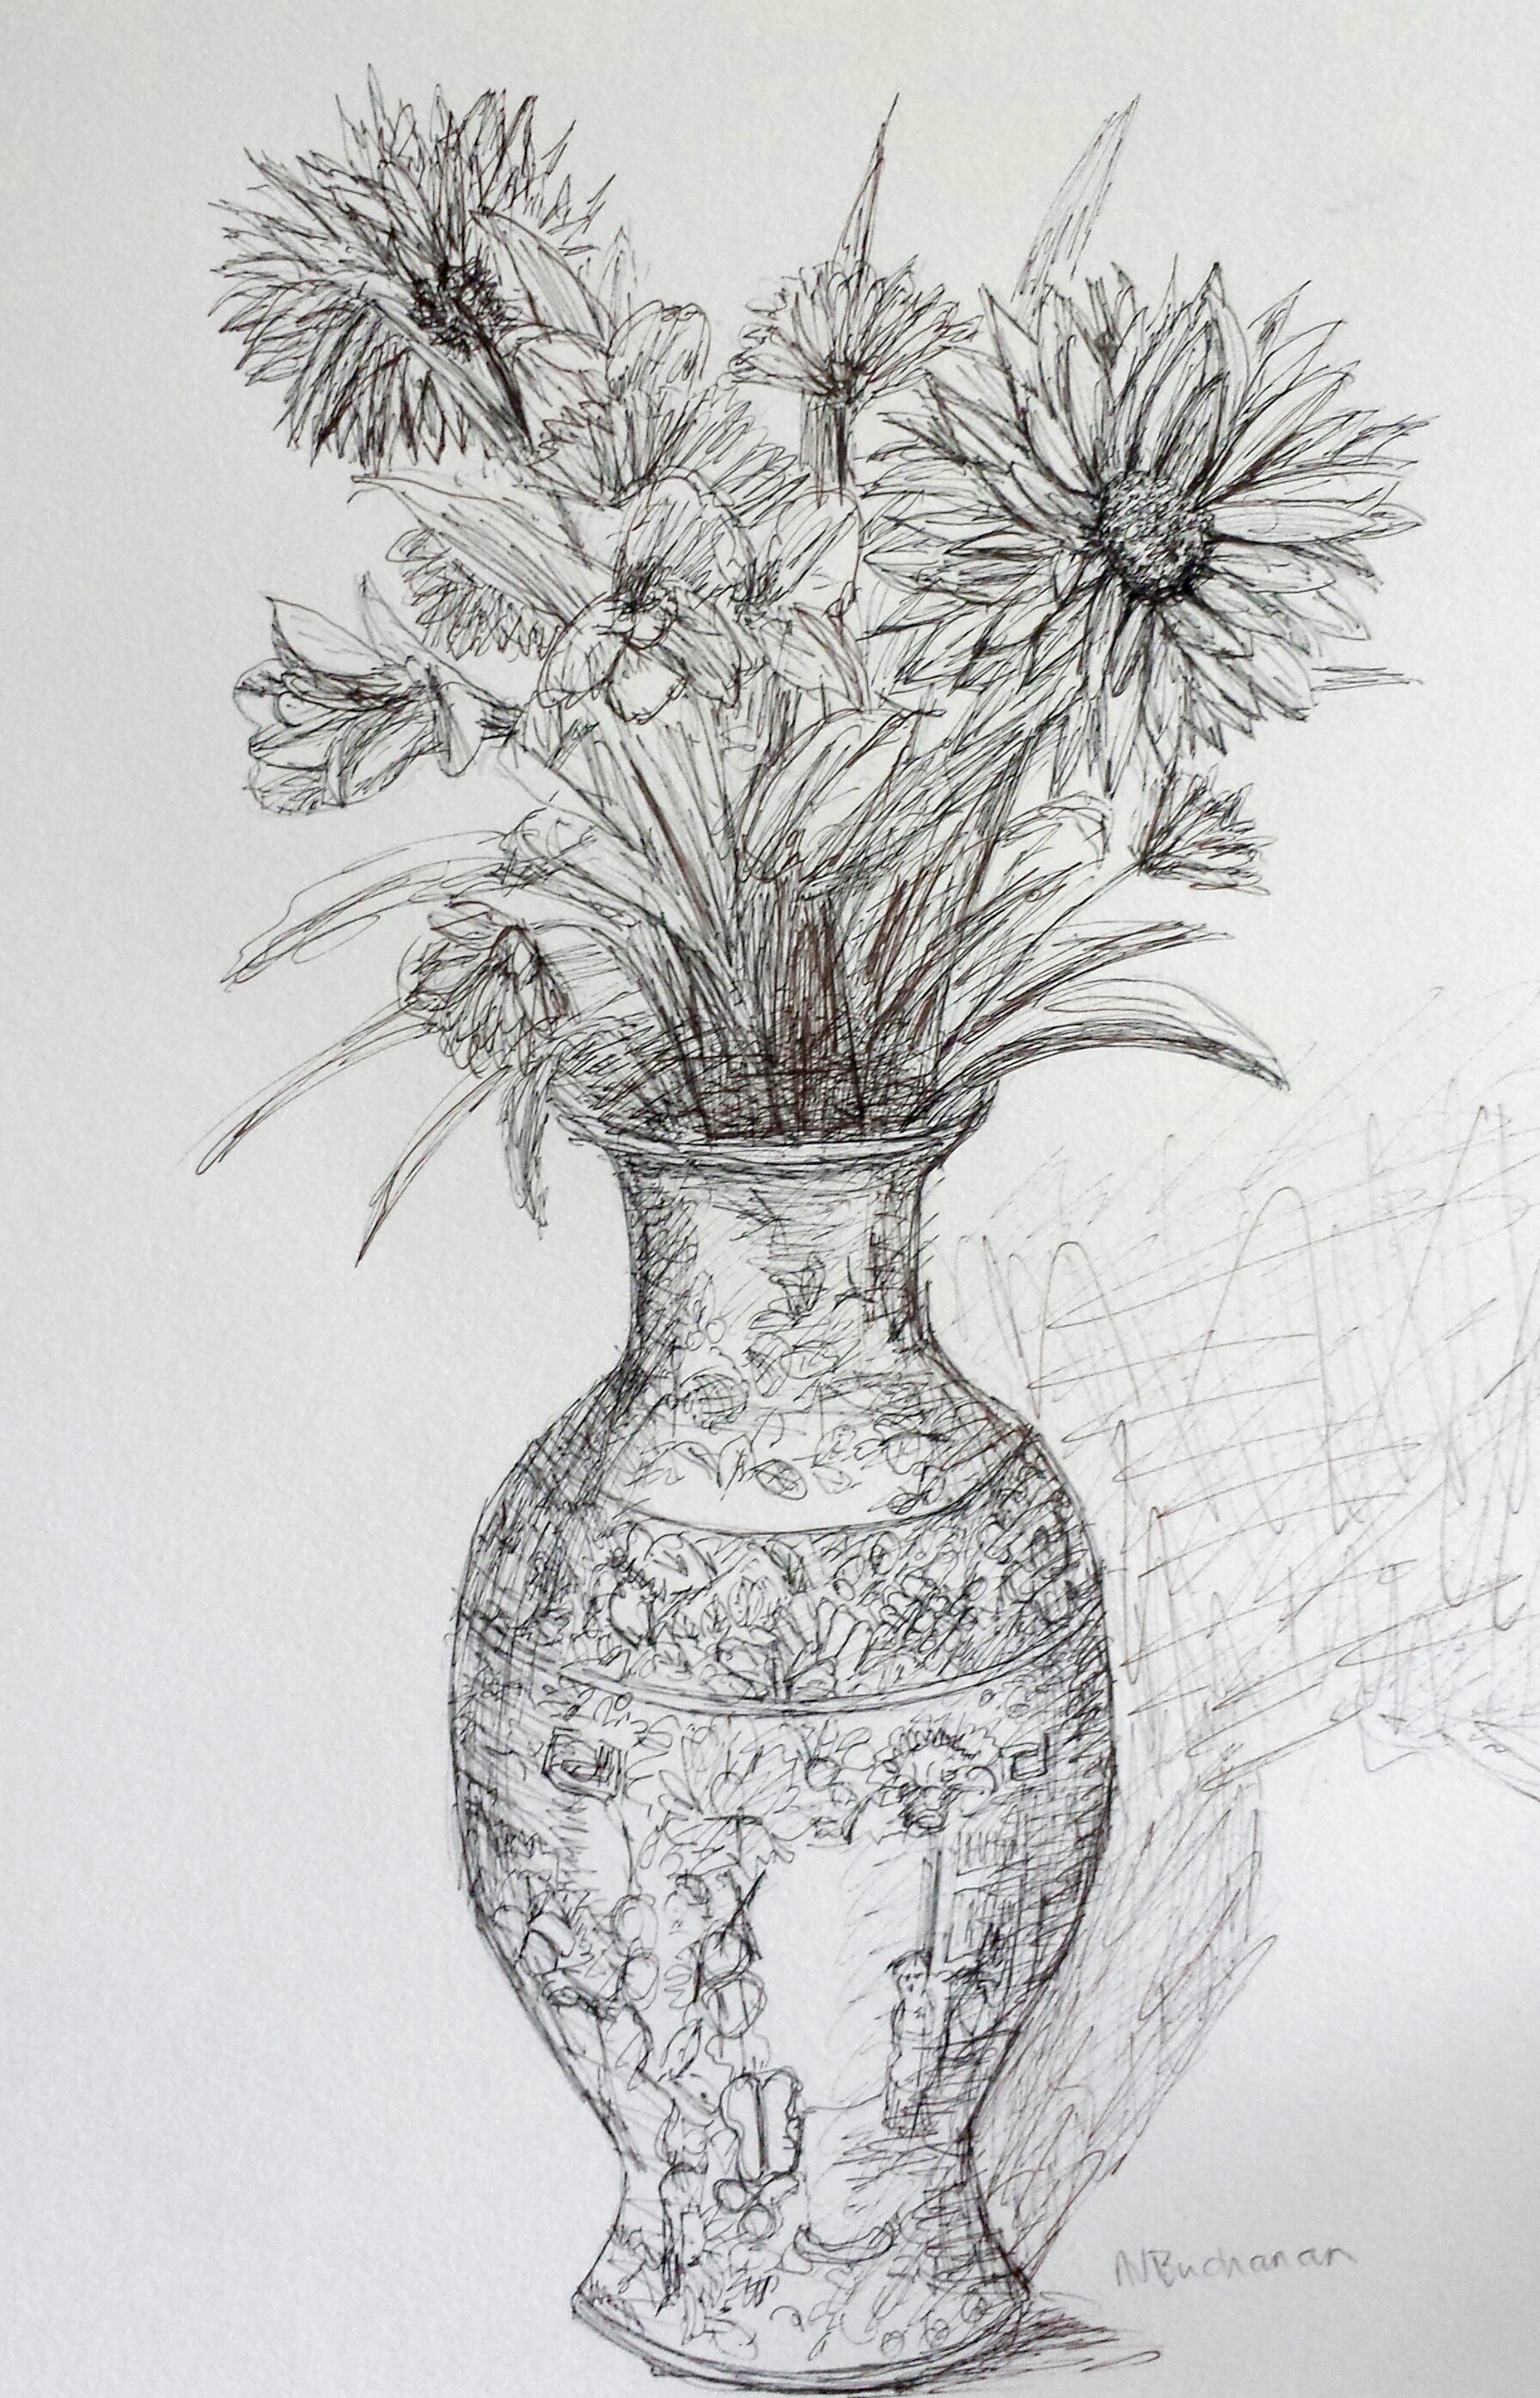 Vase of Flowers, pen and ink, 9 in x 12 in, 2016.